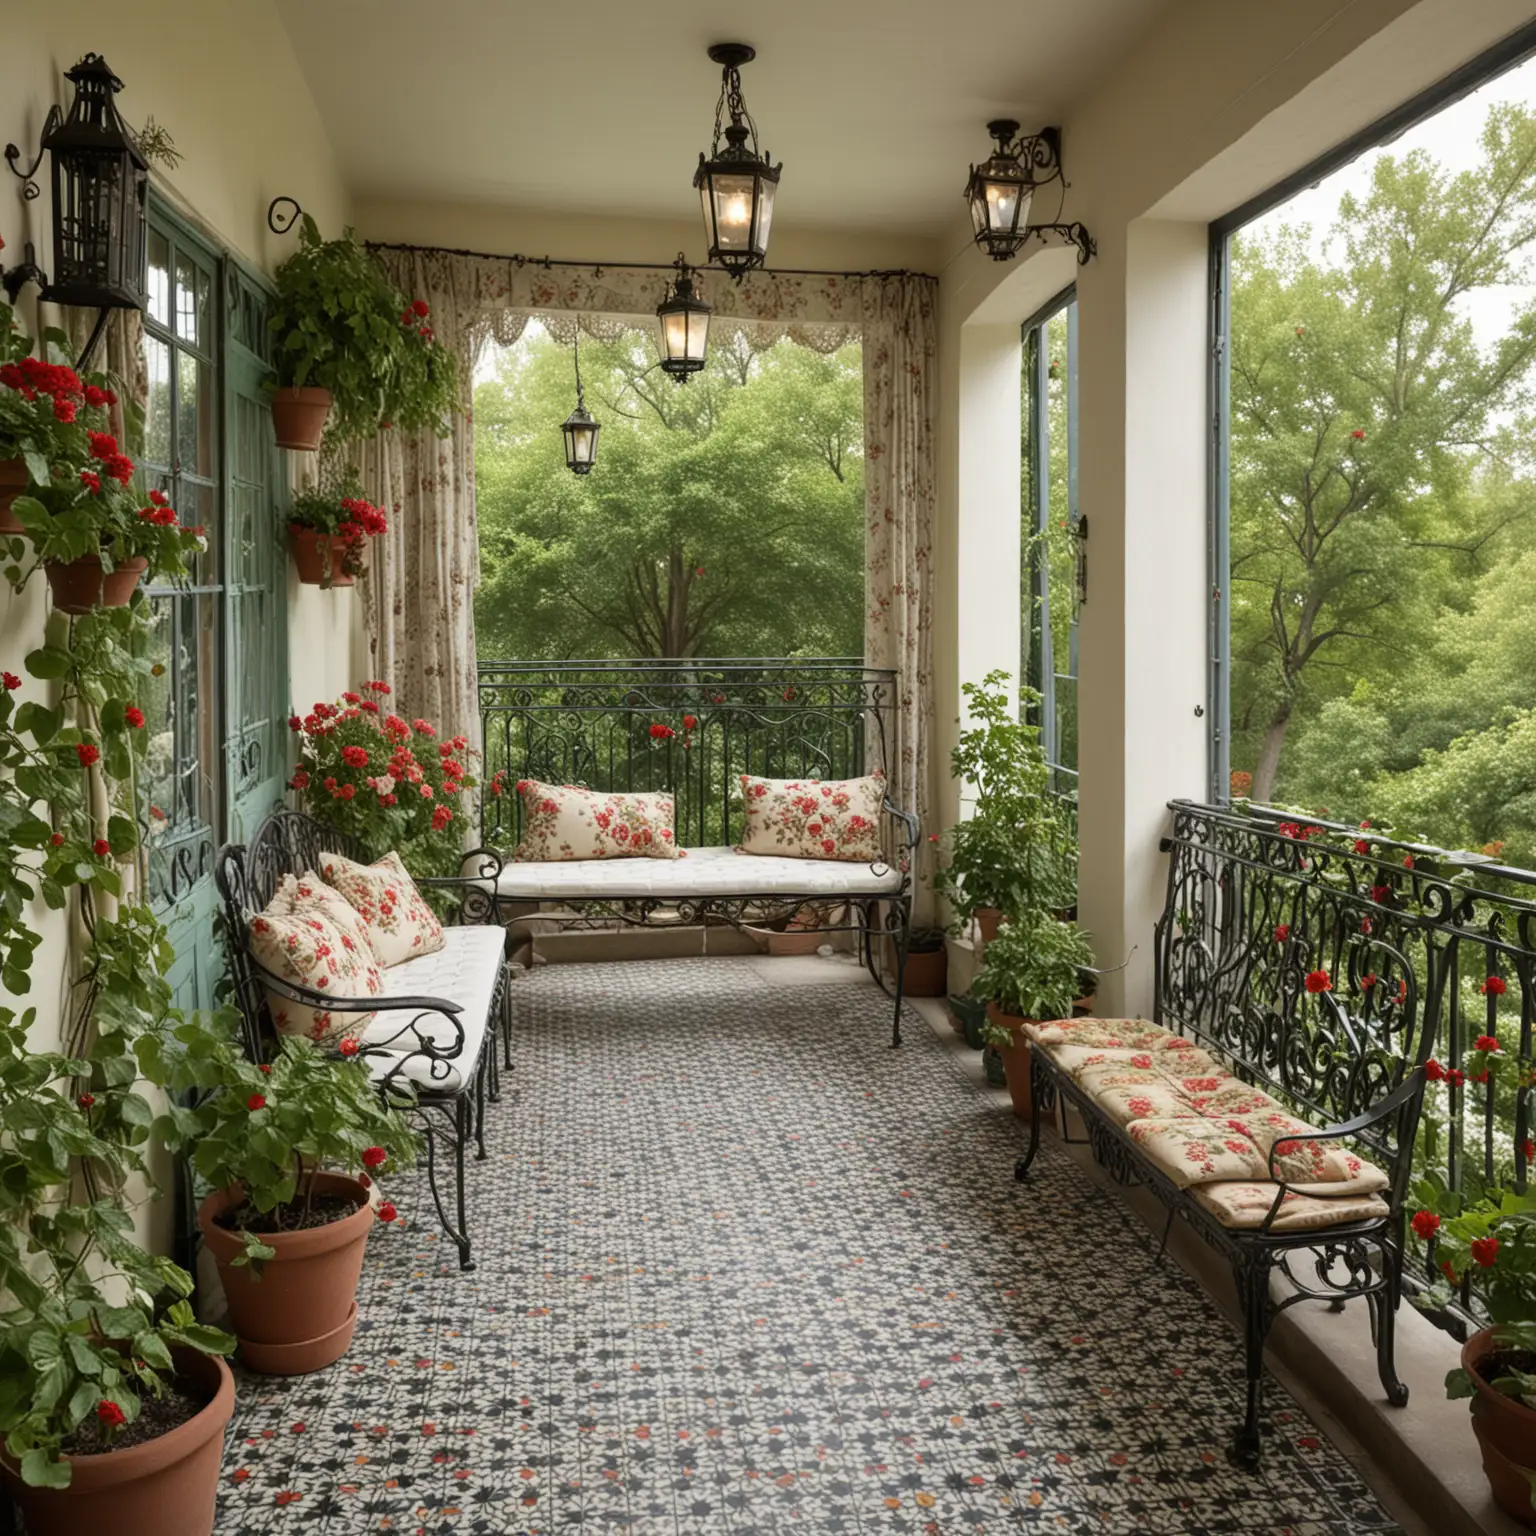 Vintage-Balcony-with-WroughtIron-Accents-and-Floral-Decor